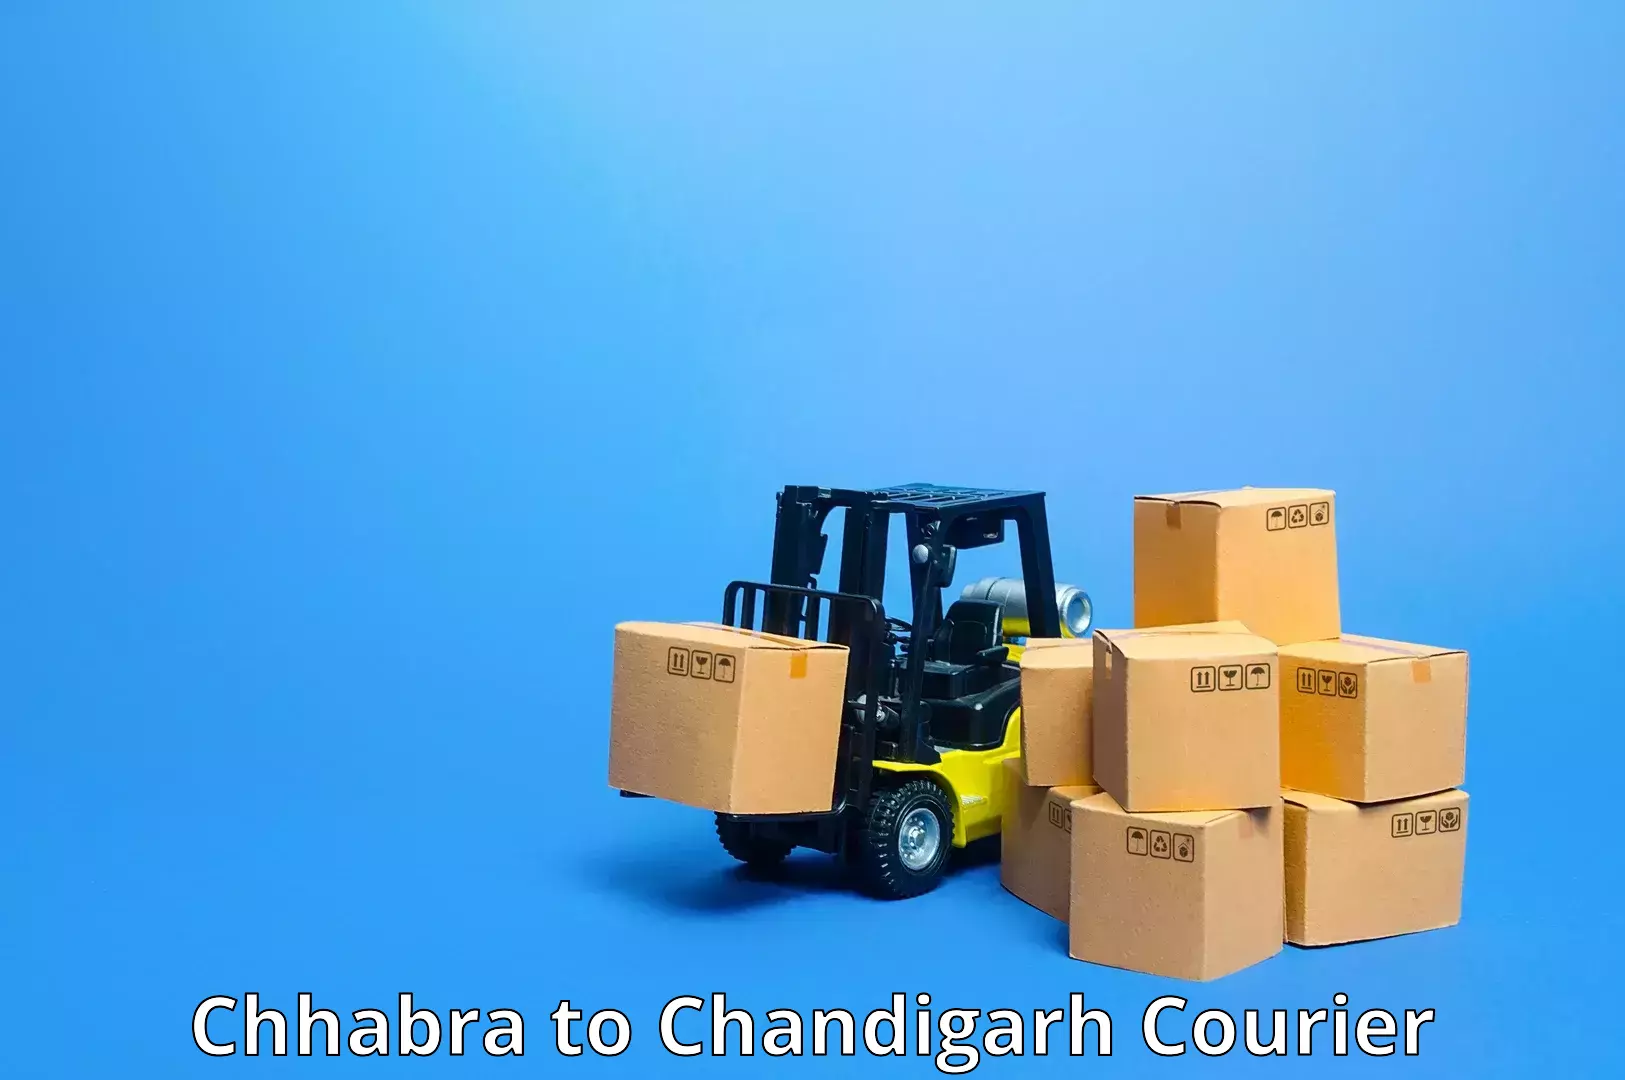 High-speed delivery Chhabra to Chandigarh